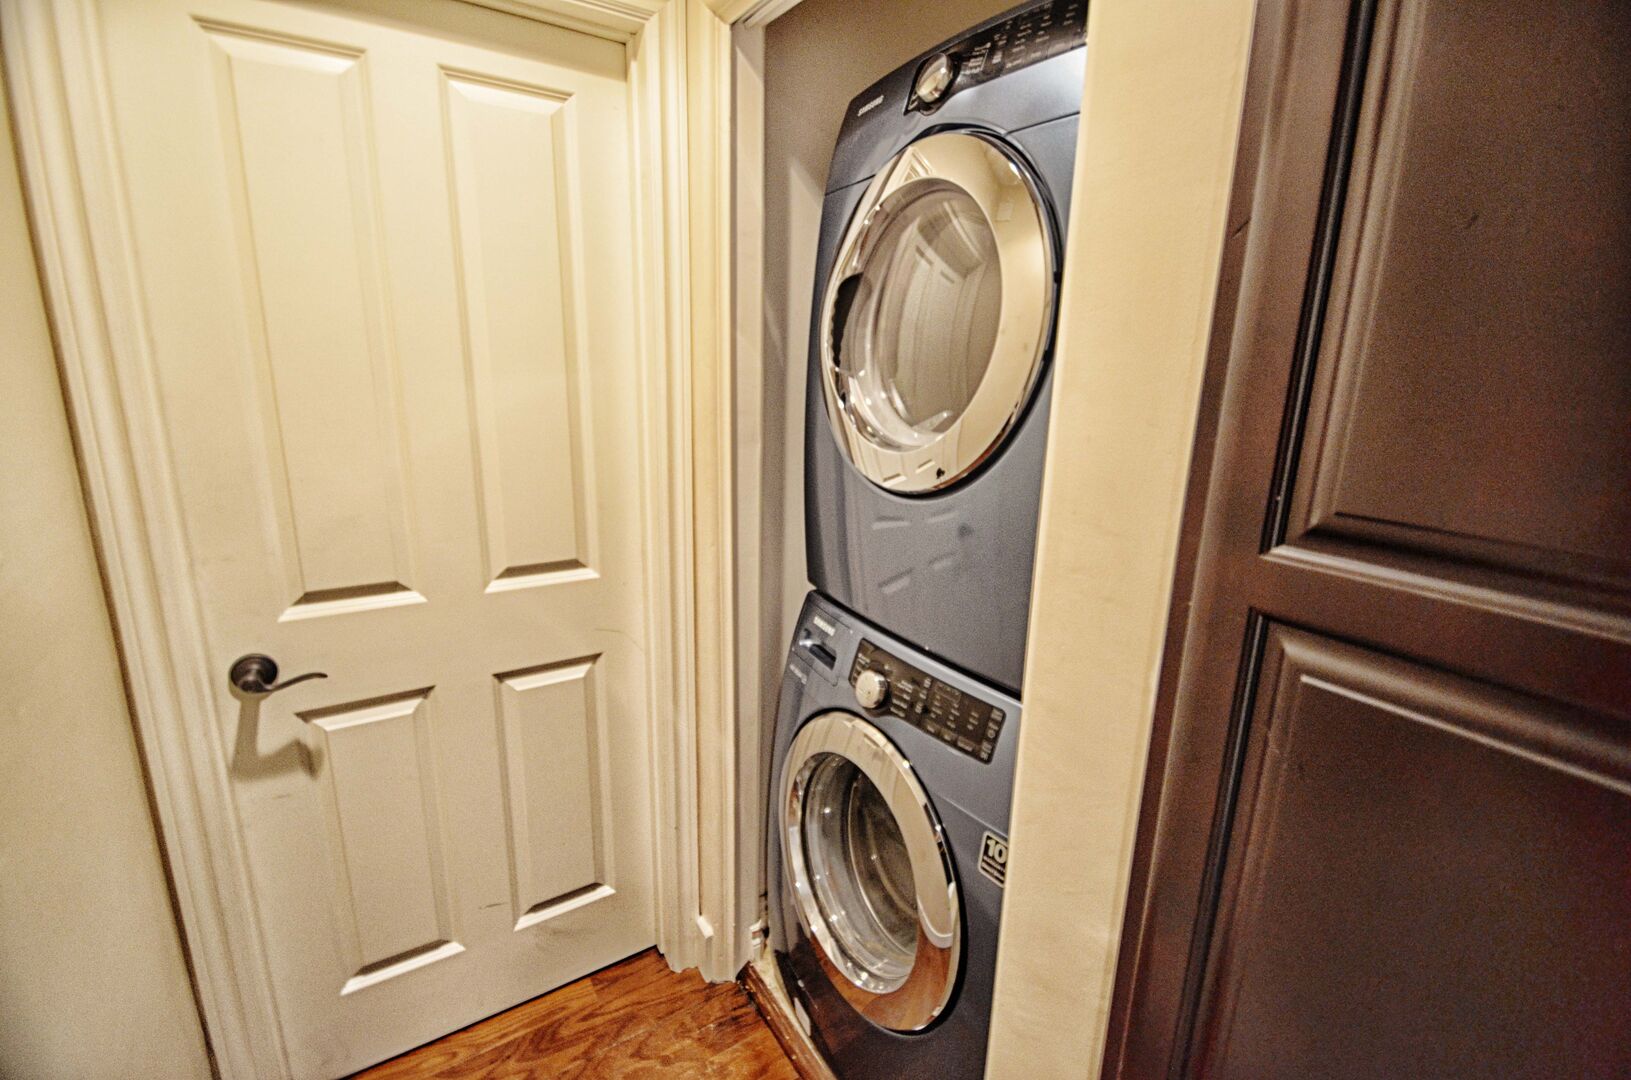 Stackable washer and dryer upstairs between guest and master bedrooms